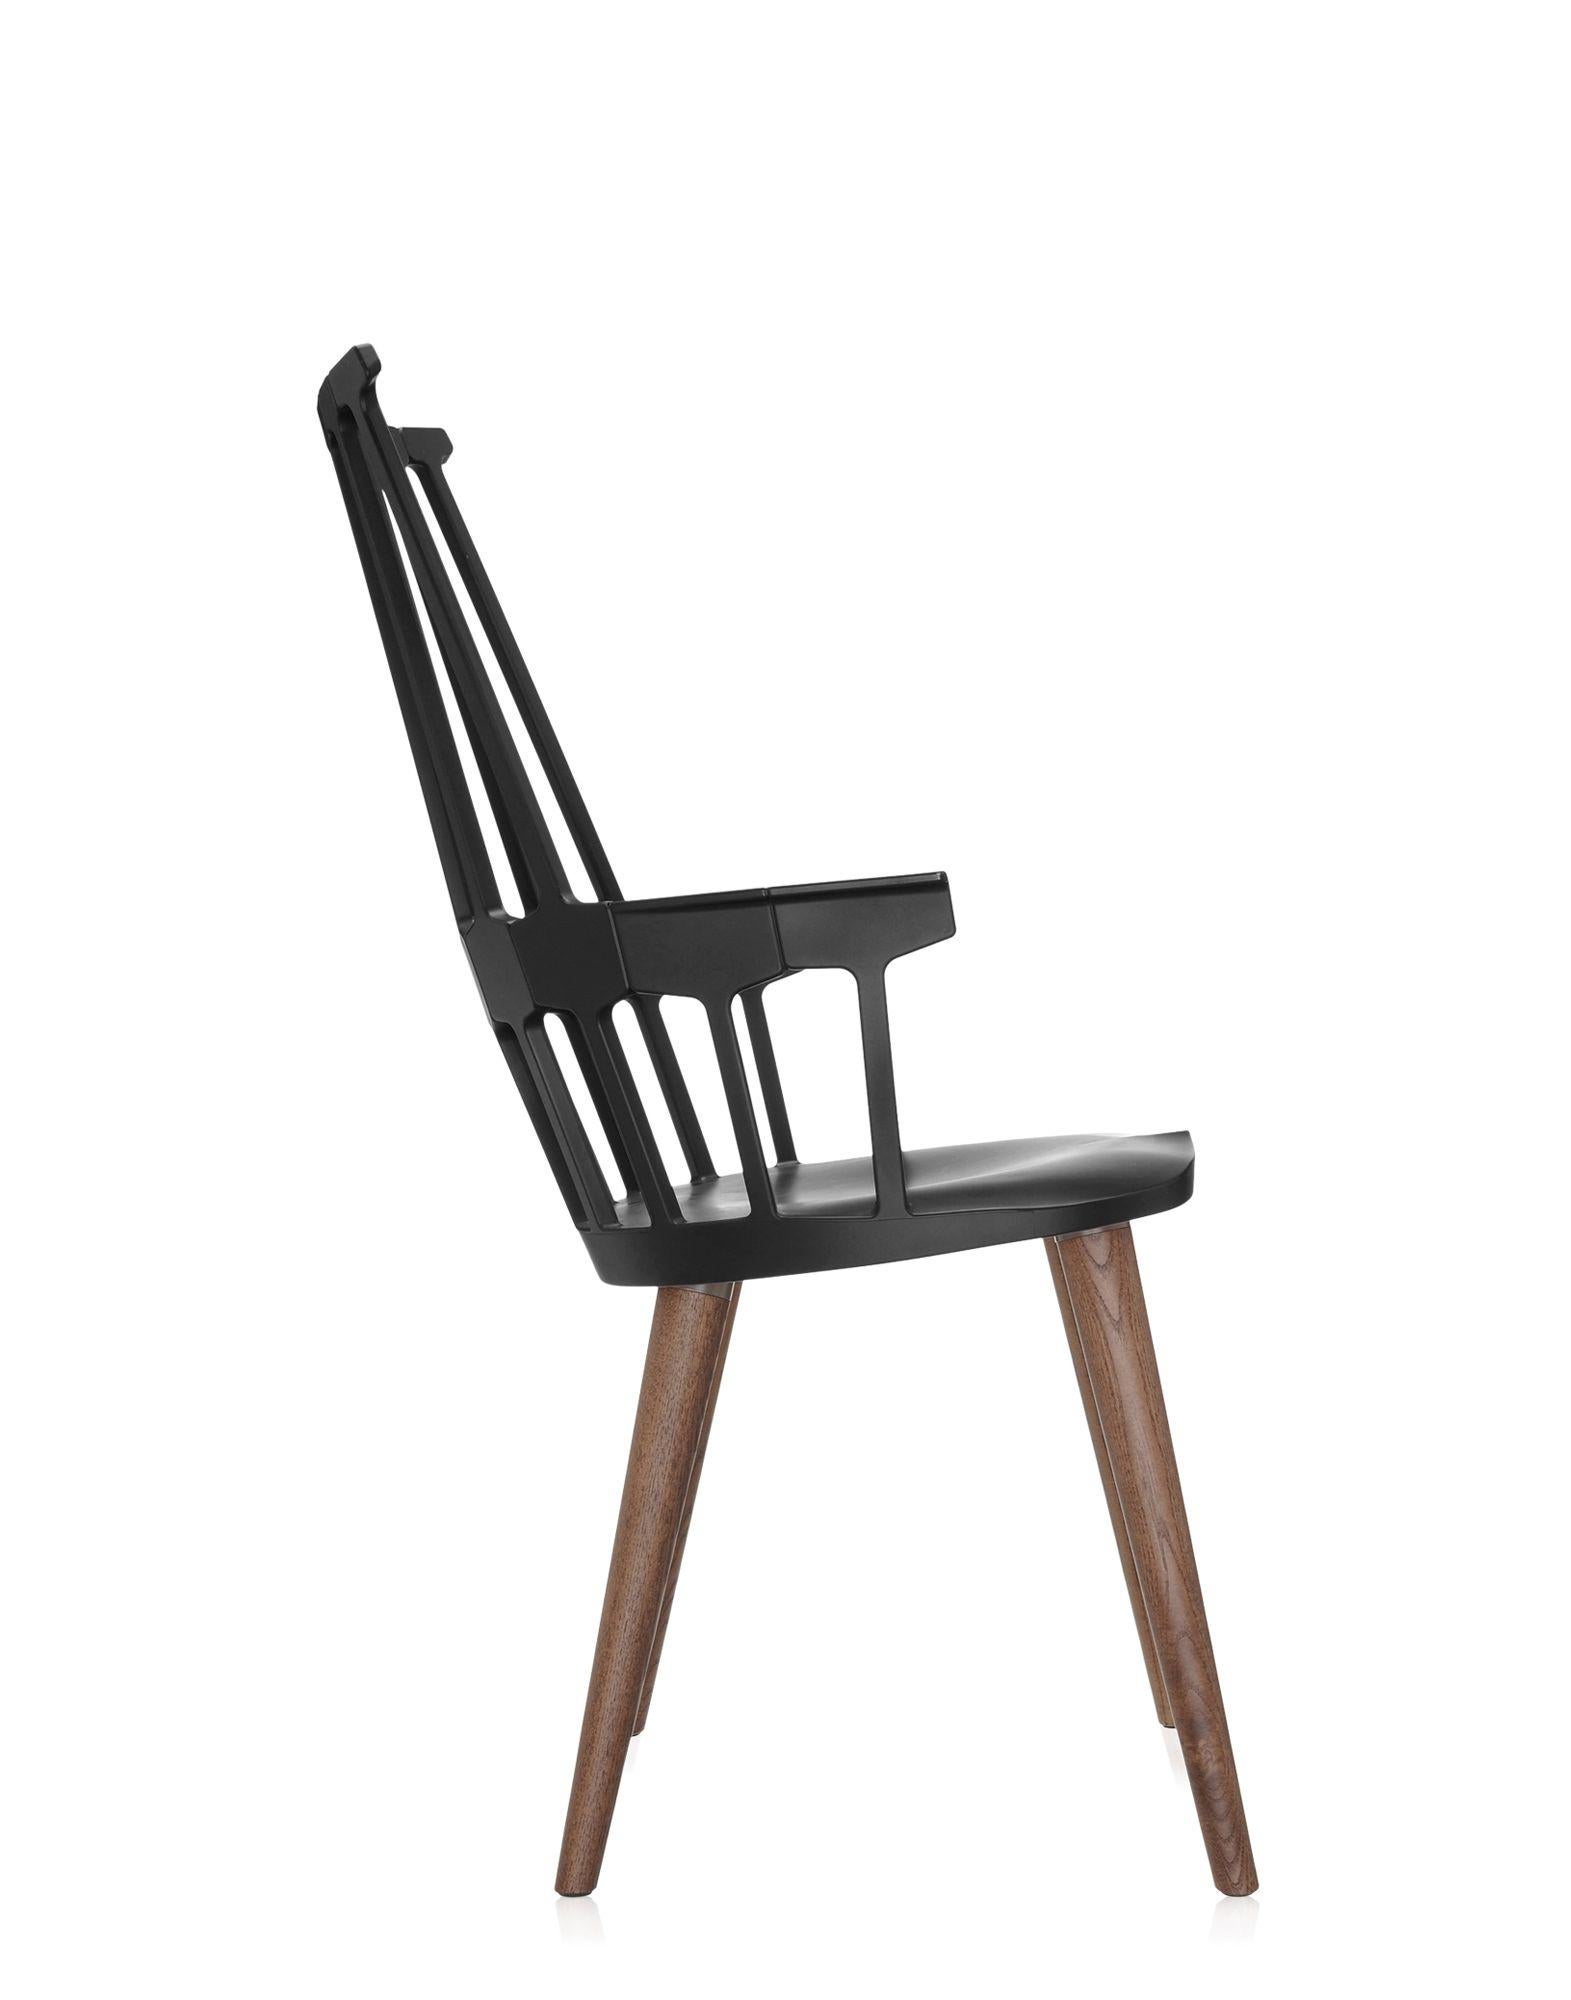 Modern Set of 2 Kartell Comback Chairs in Black with Oak Legs by Patricia Urquiola